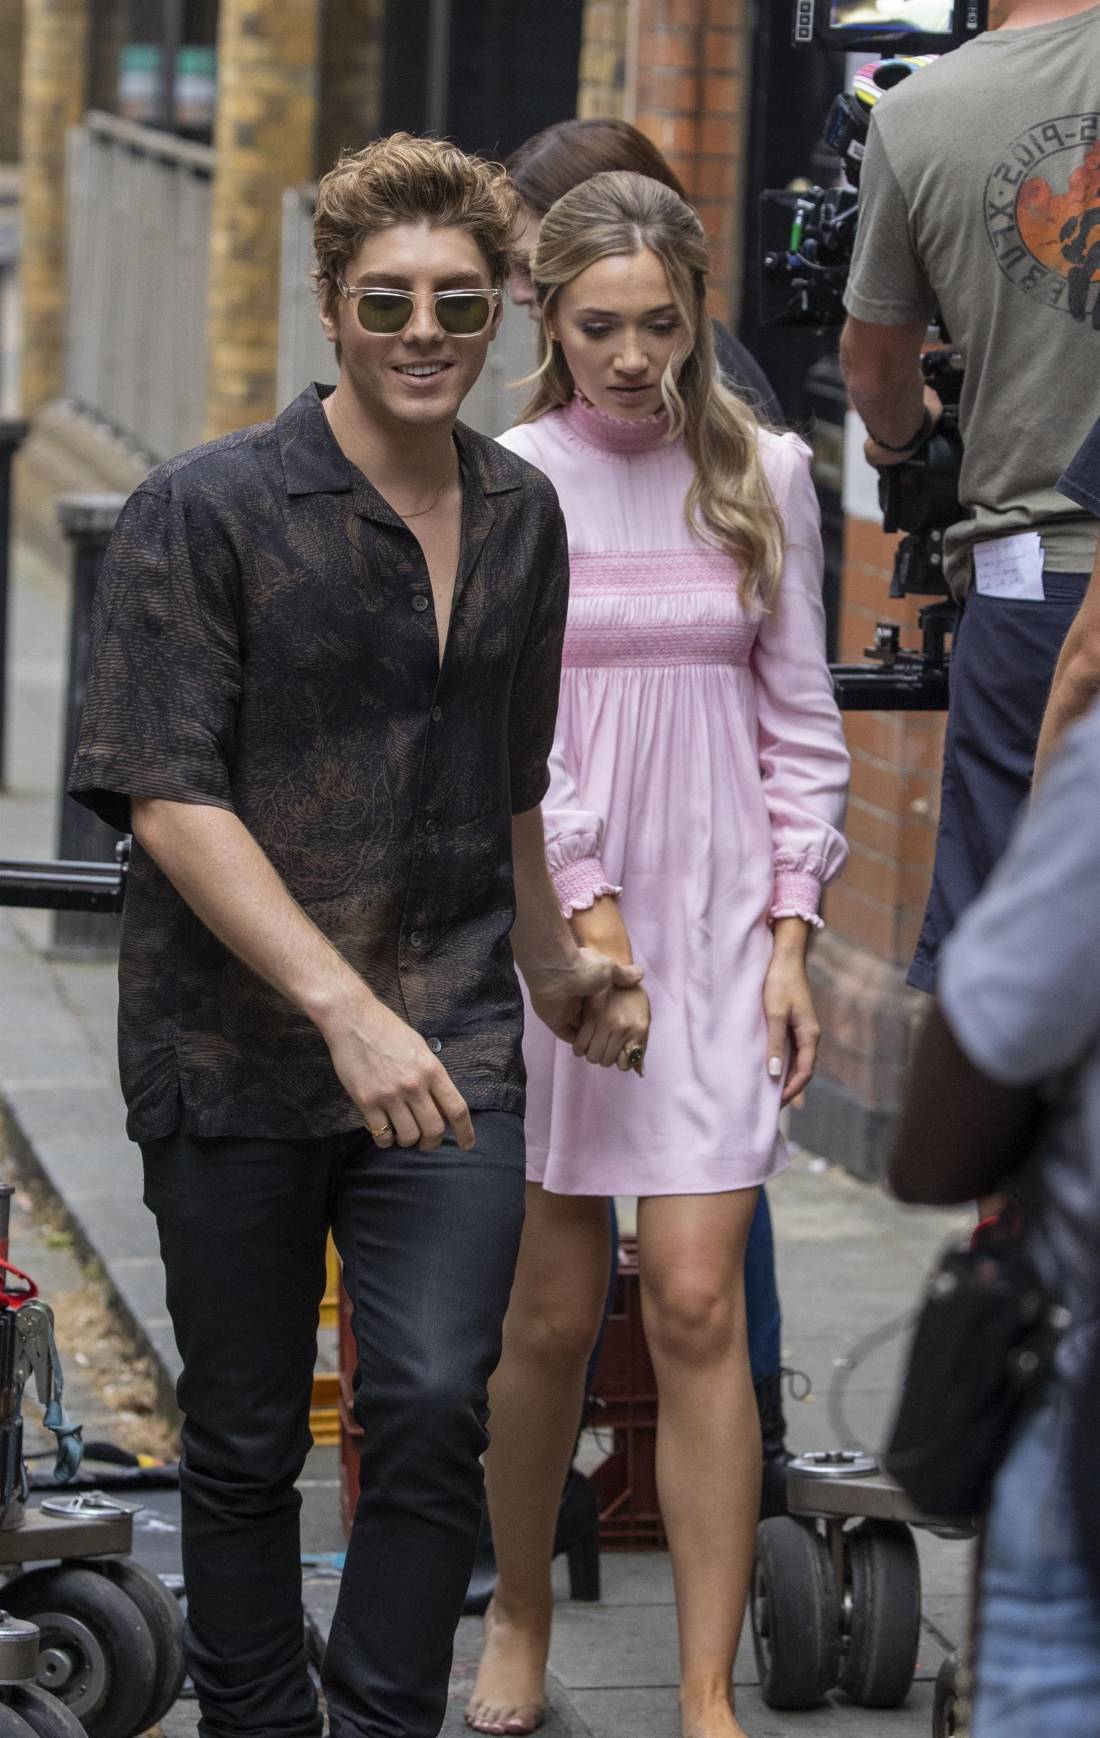 Tilly Keeper - With Lukas Gage film 'You' in the borough market in London